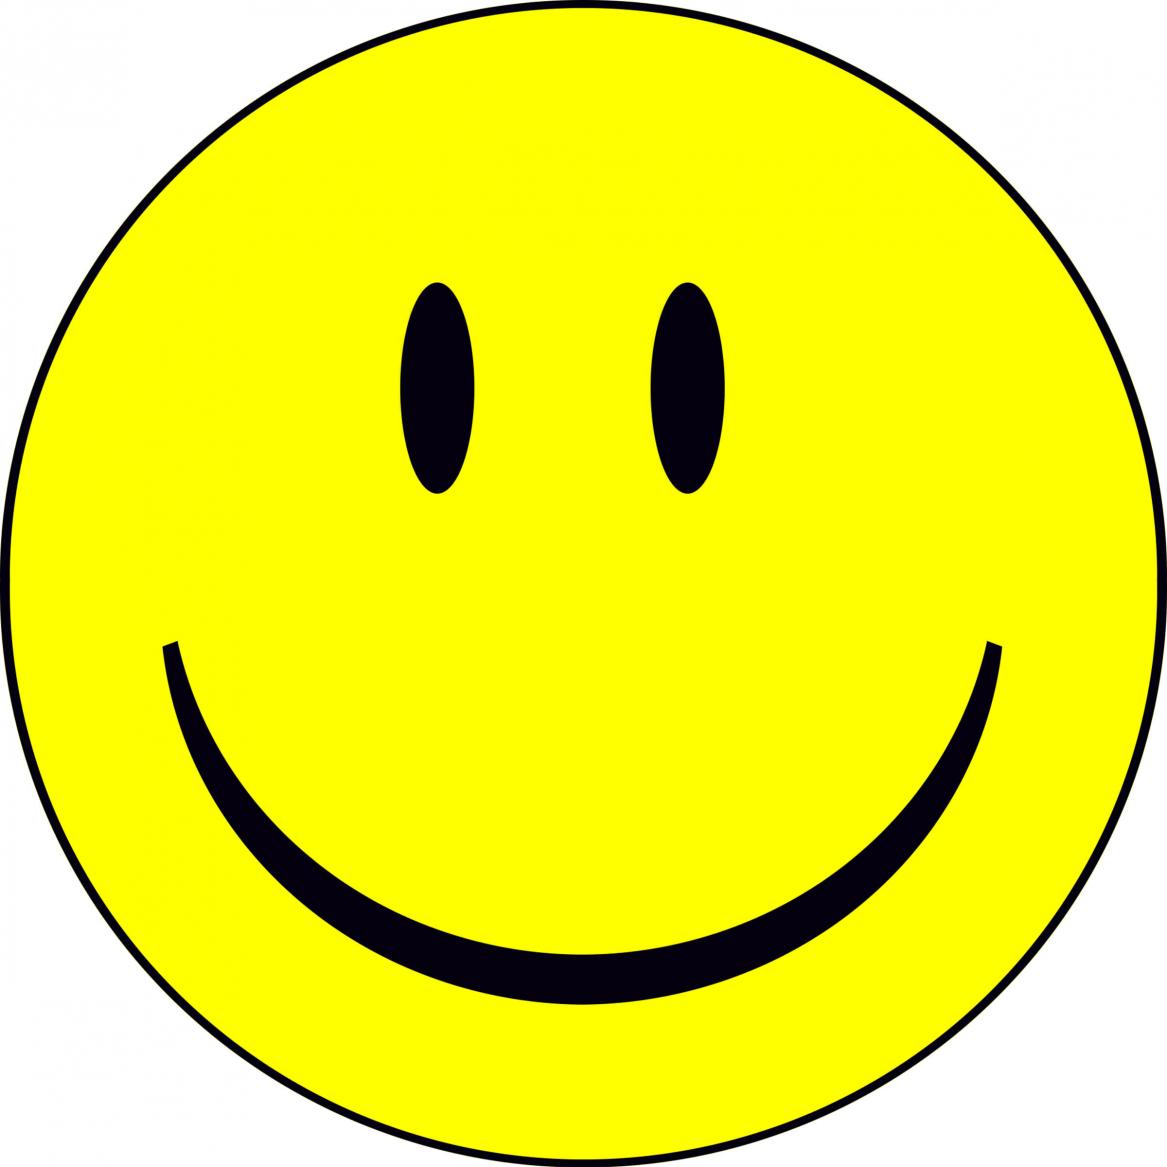 Shy Smiley Face Clipart   Cliparthut   Free Clipart